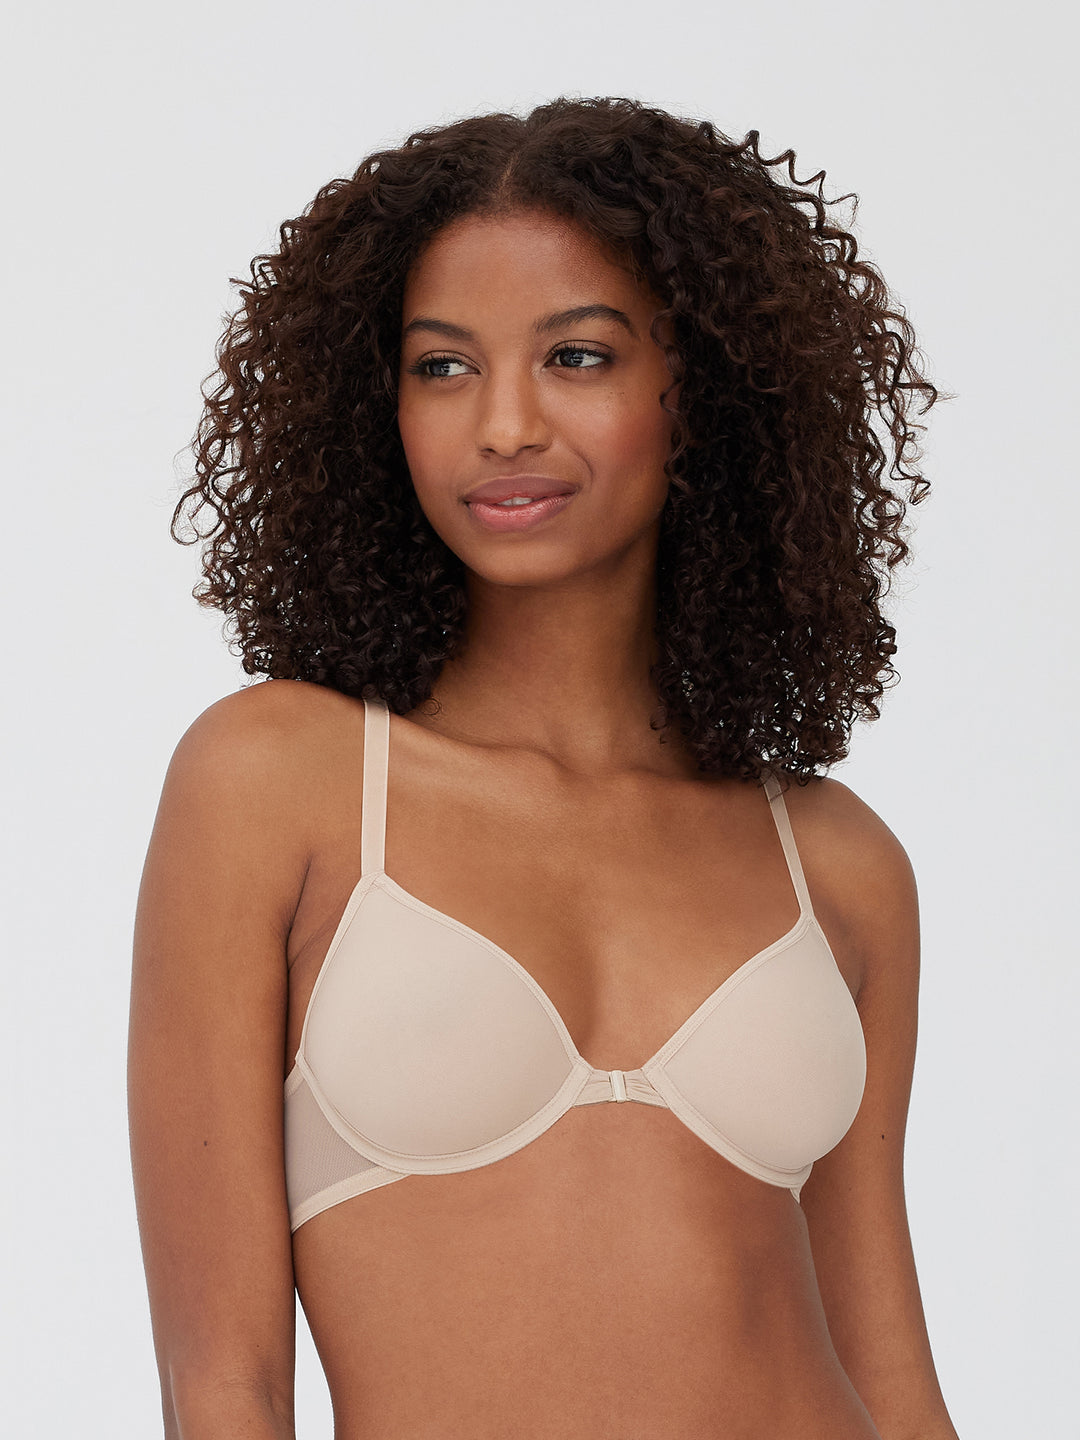 Calvin Klein Underwear Perfectly Fit Sexy Signature Unlined Underwire Bra  and Bikini with Lace